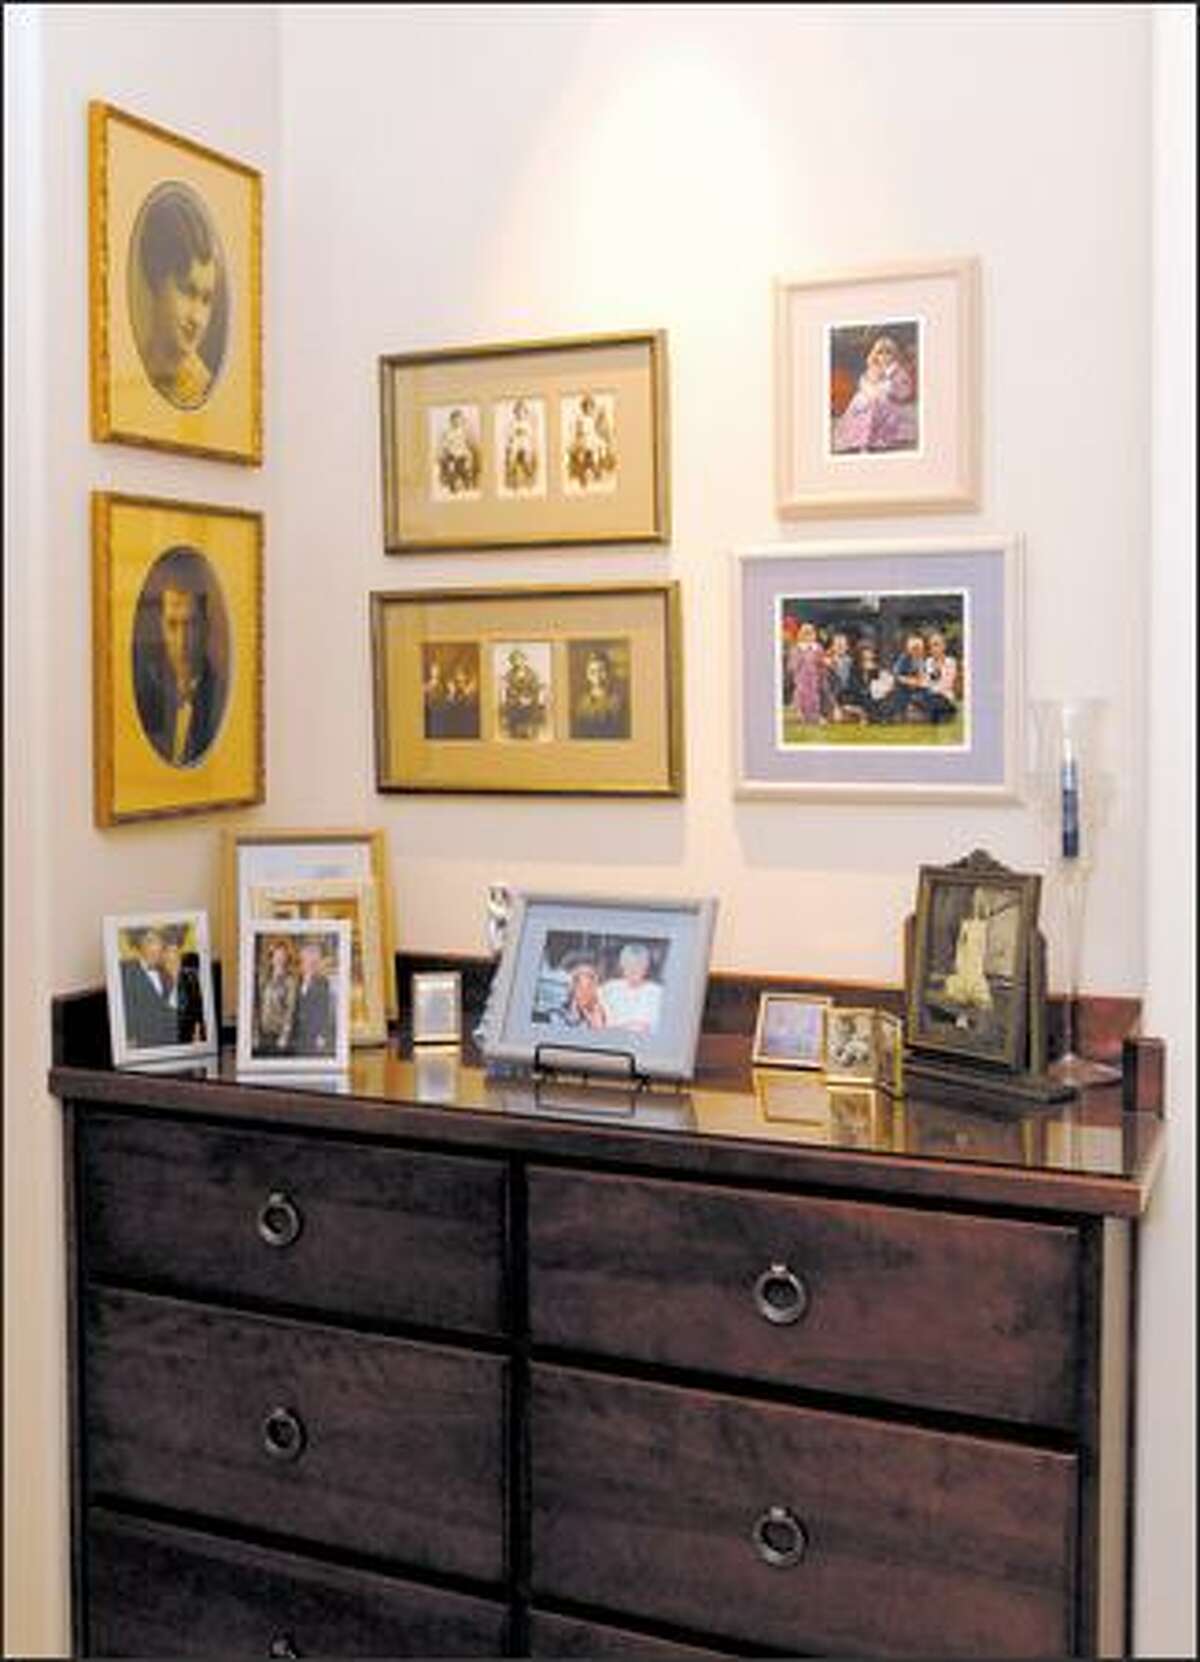 Group pictures according to frames, style and content, says John Willis, owner of Amiker Designs & Custom Framing.